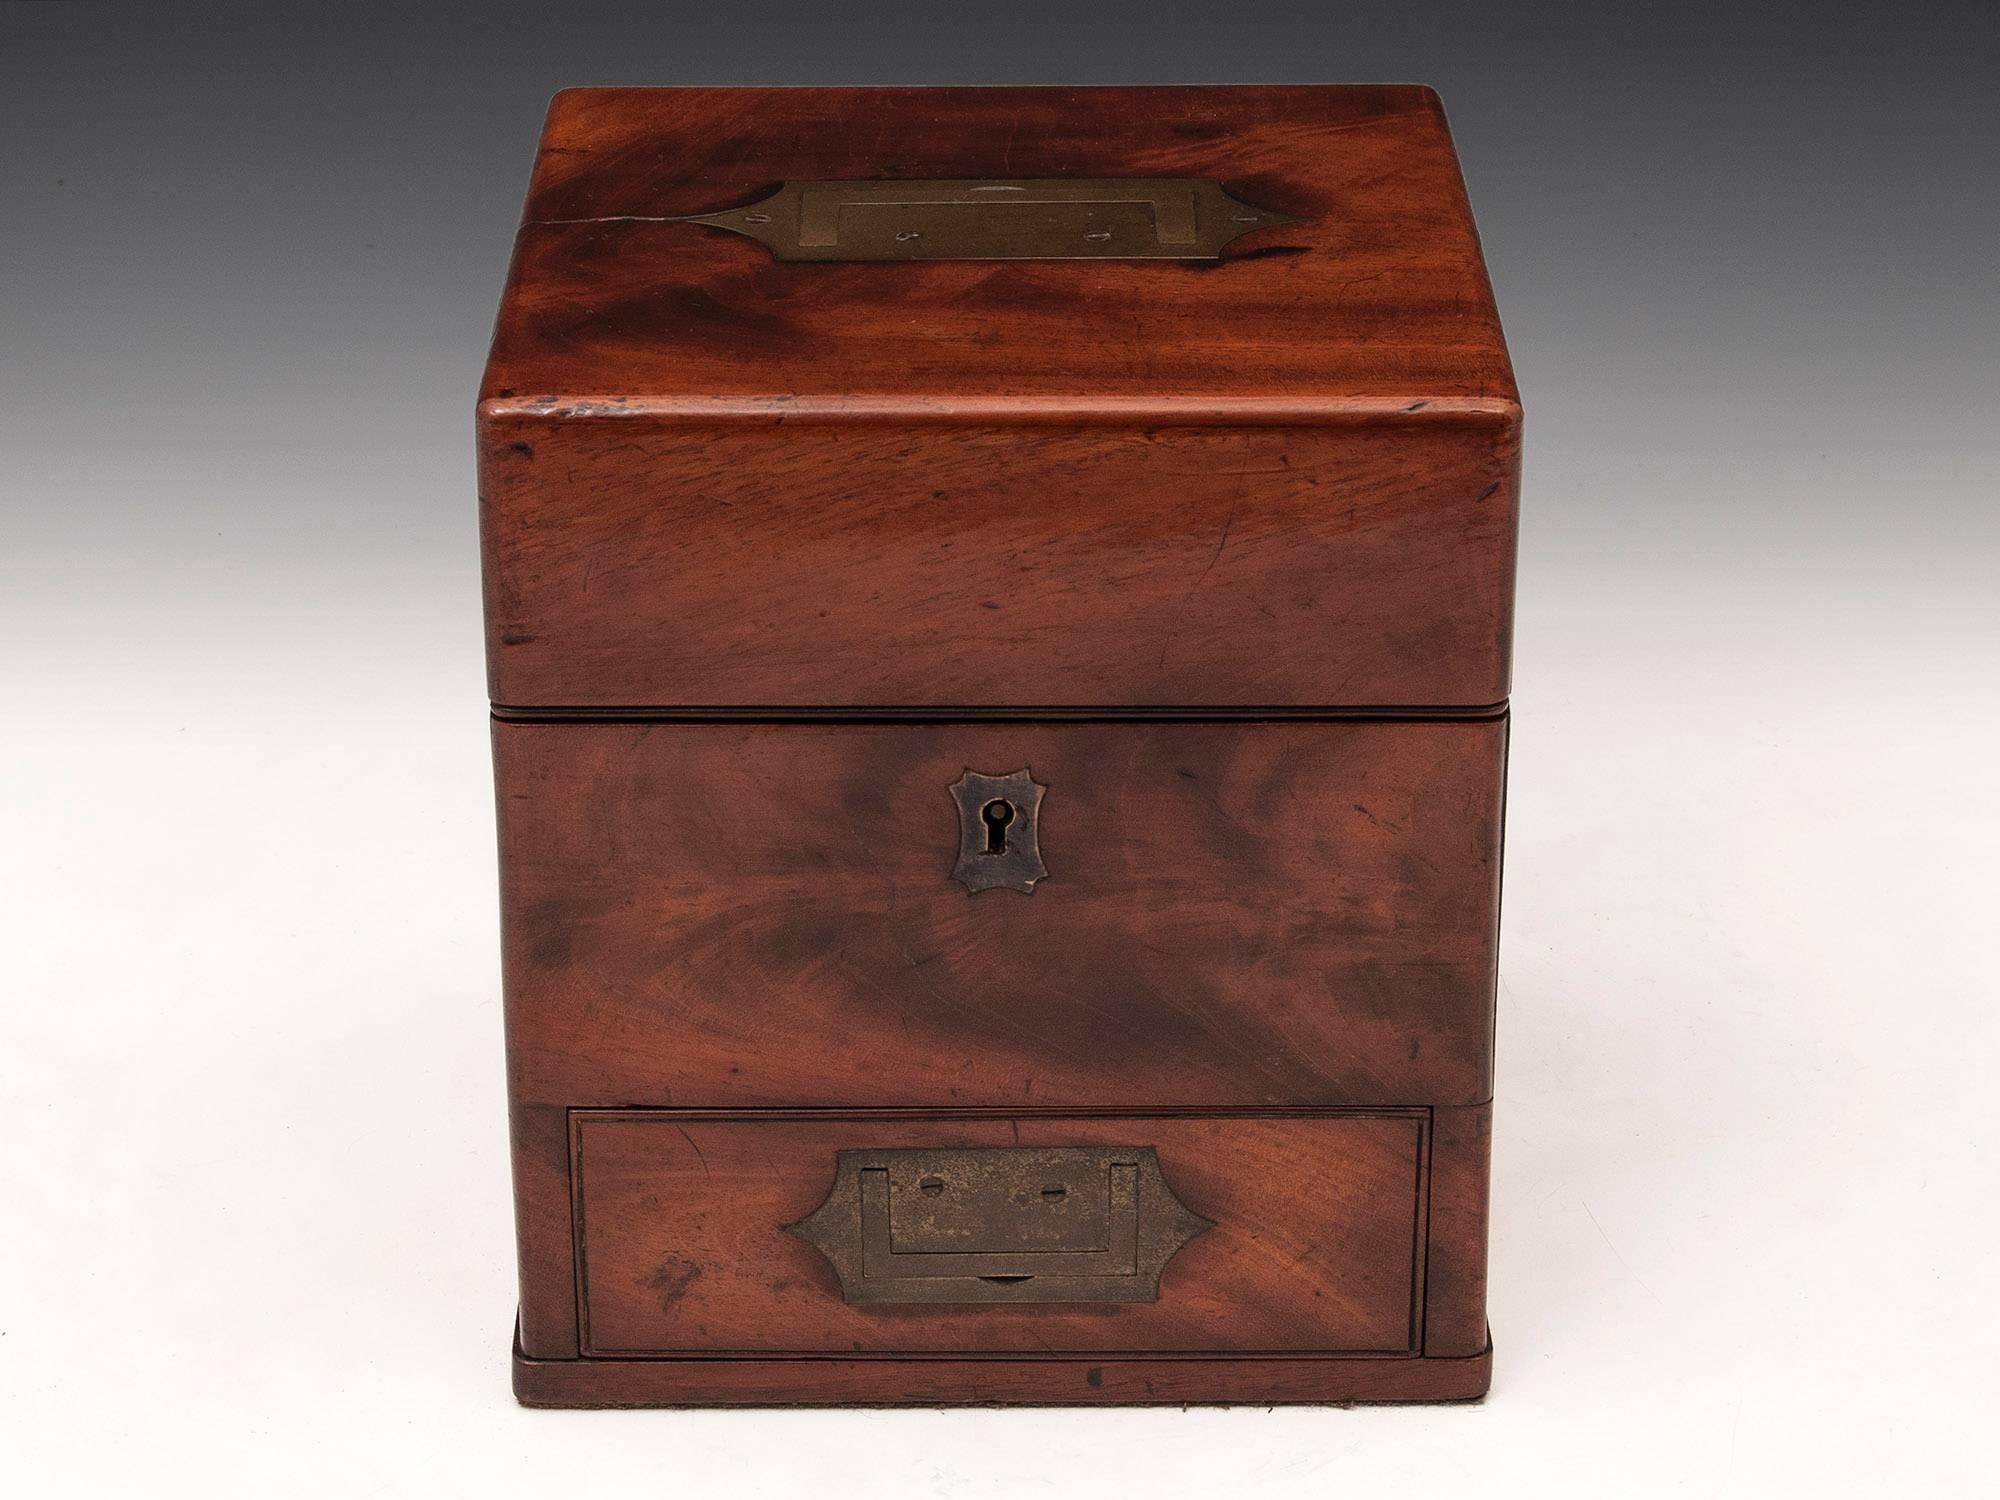 Great Britain (UK) Antique Apothecary Box